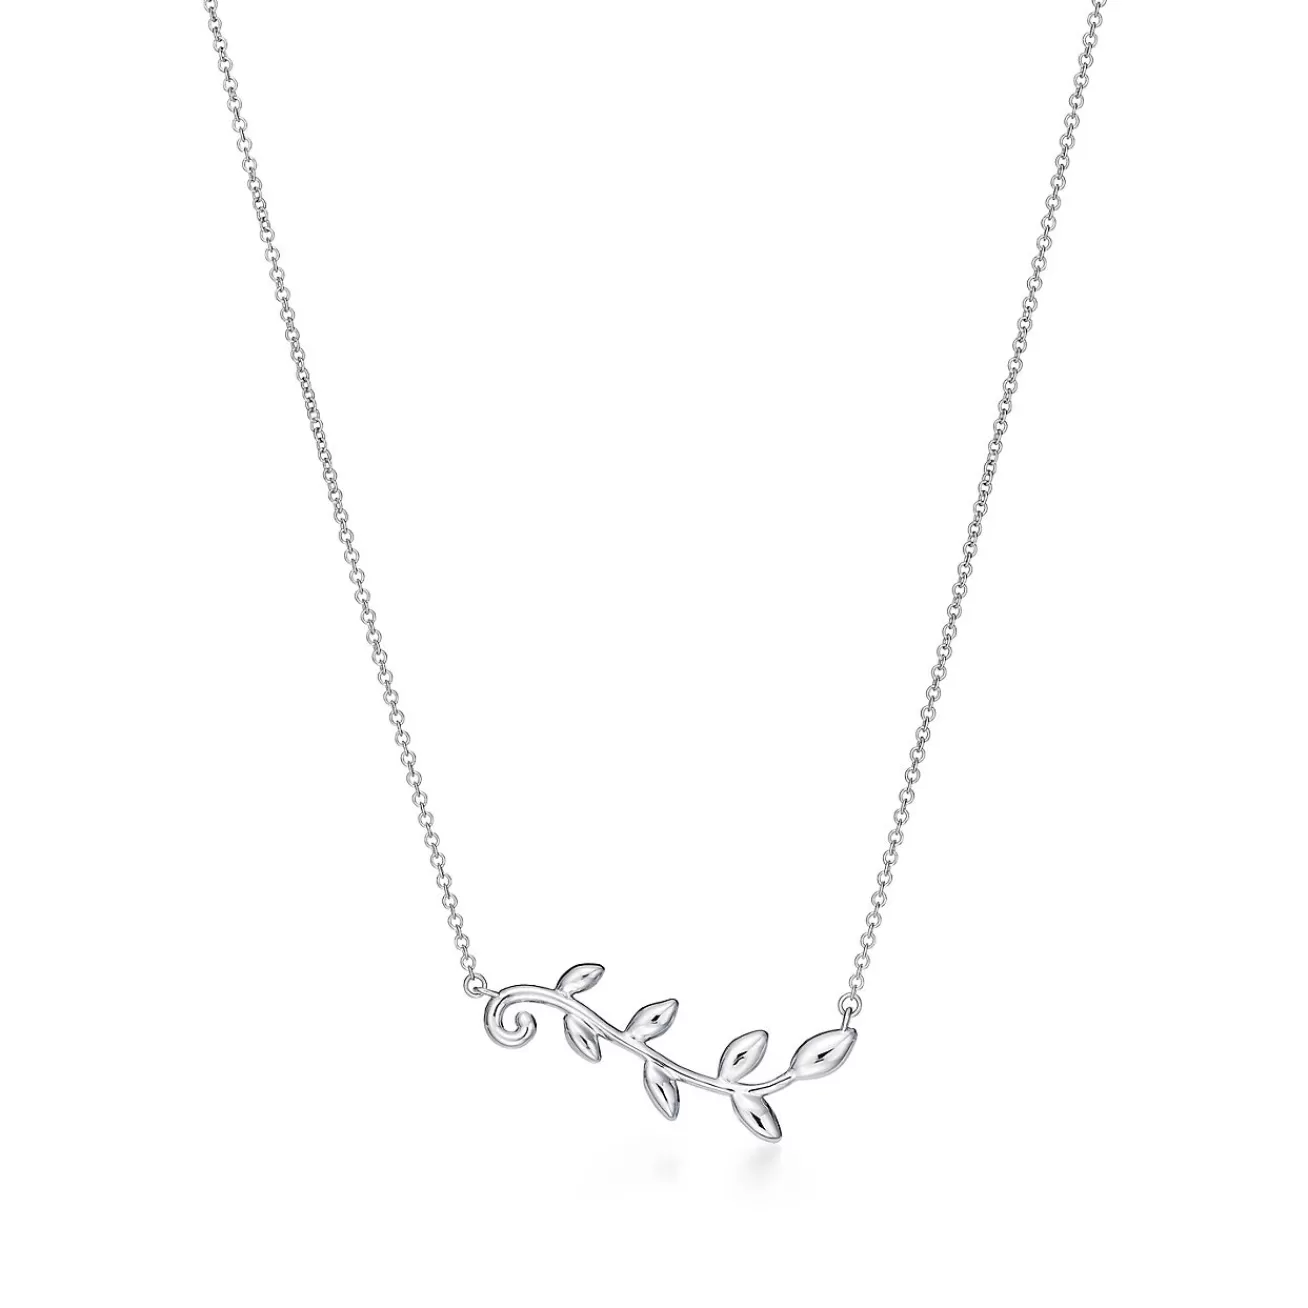 Tiffany & Co. Paloma Picasso® Olive Leaf vine pendant in sterling silver. | ^ Necklaces & Pendants | Gifts for Her